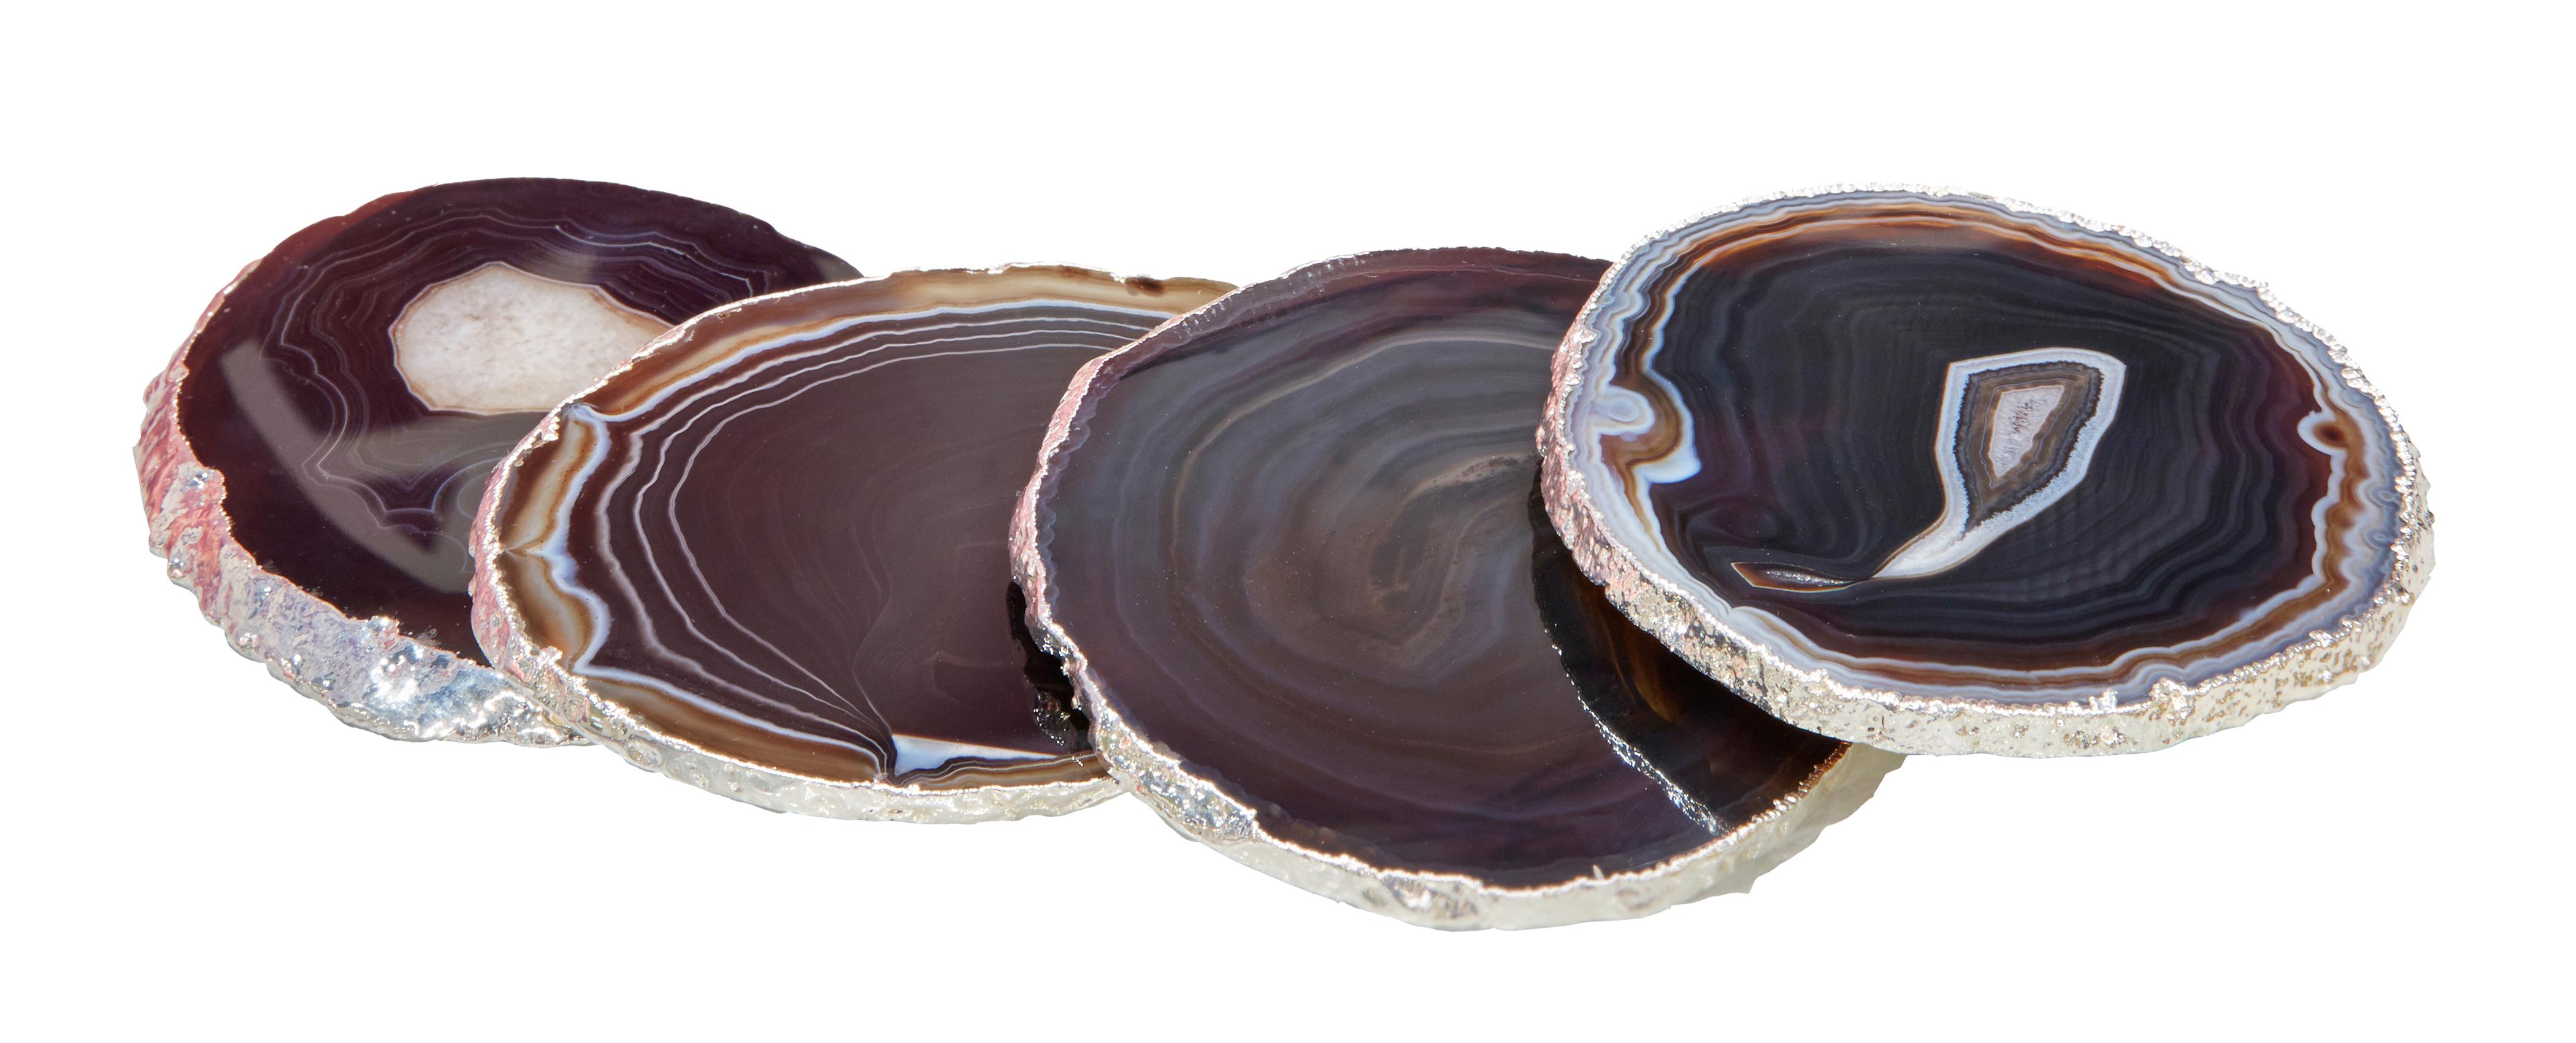 Brazilian Lumino Coasters in Midnight Agate and 24-Karat Pure Silver by ANNA new york